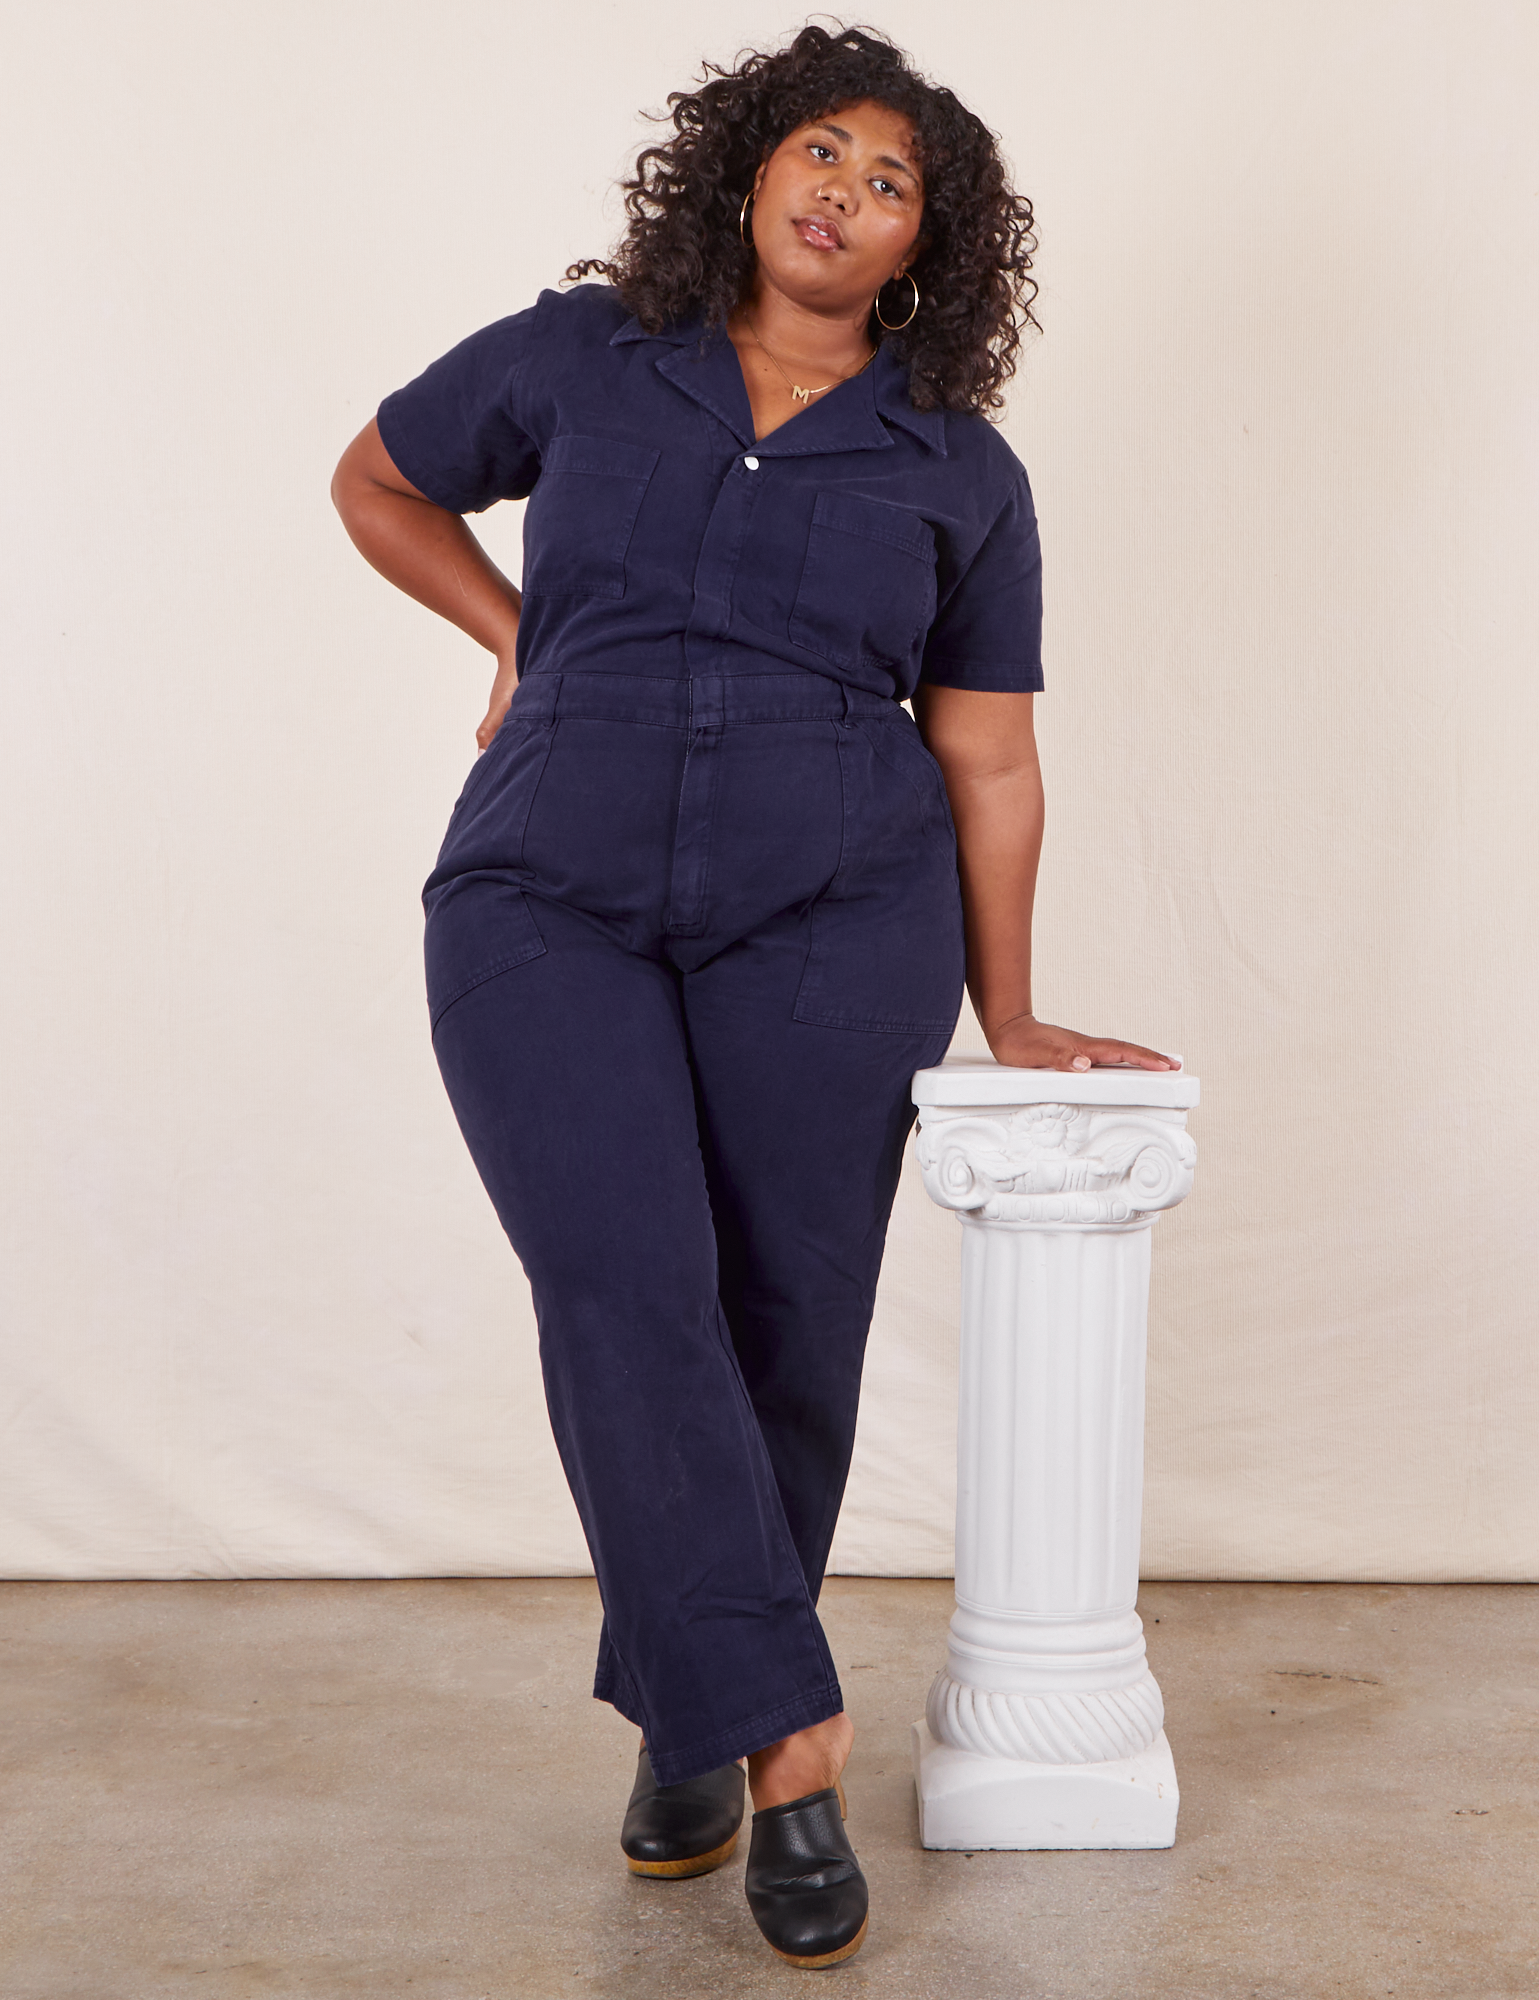 Morgan is 5&#39;5&quot; and wearing 2XL Short Sleeve Jumpsuit in Navy Blue